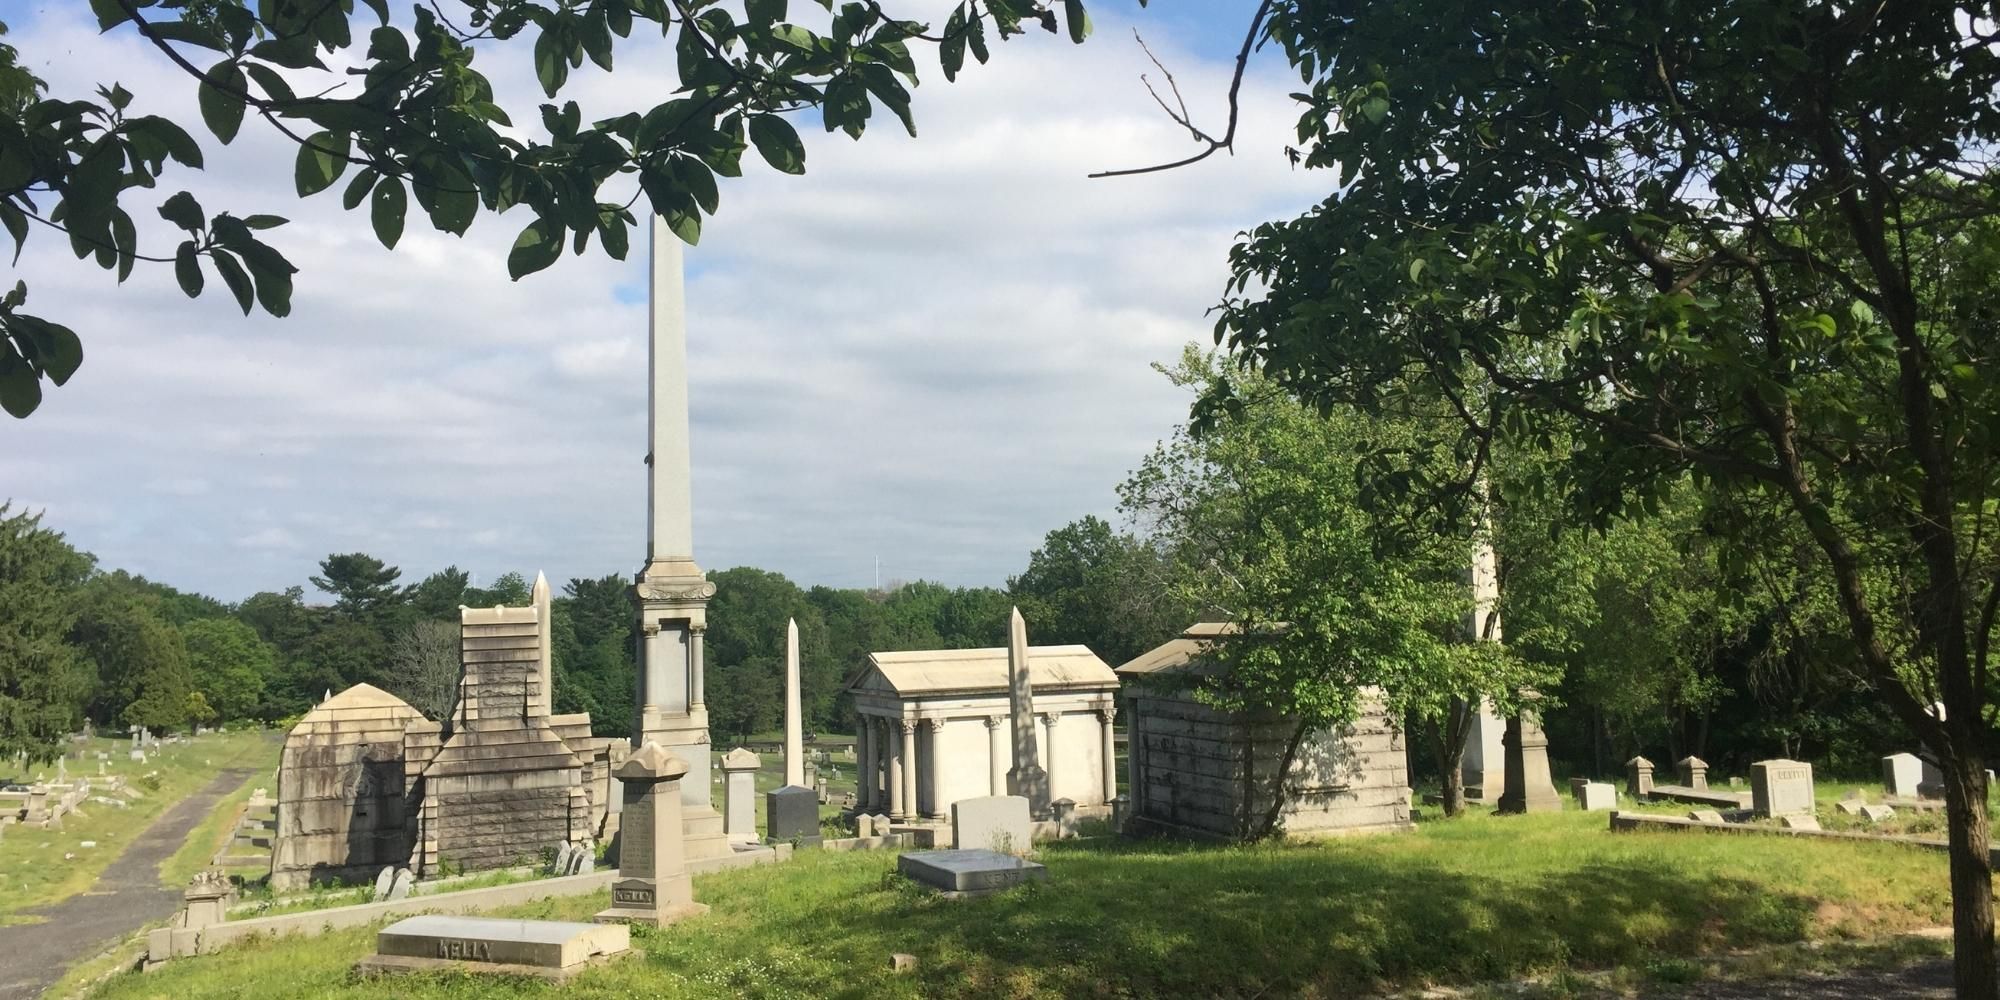 Photo of the grounds and several graves at Mount Moriah cemetery surrounded by grass and green leafed trees